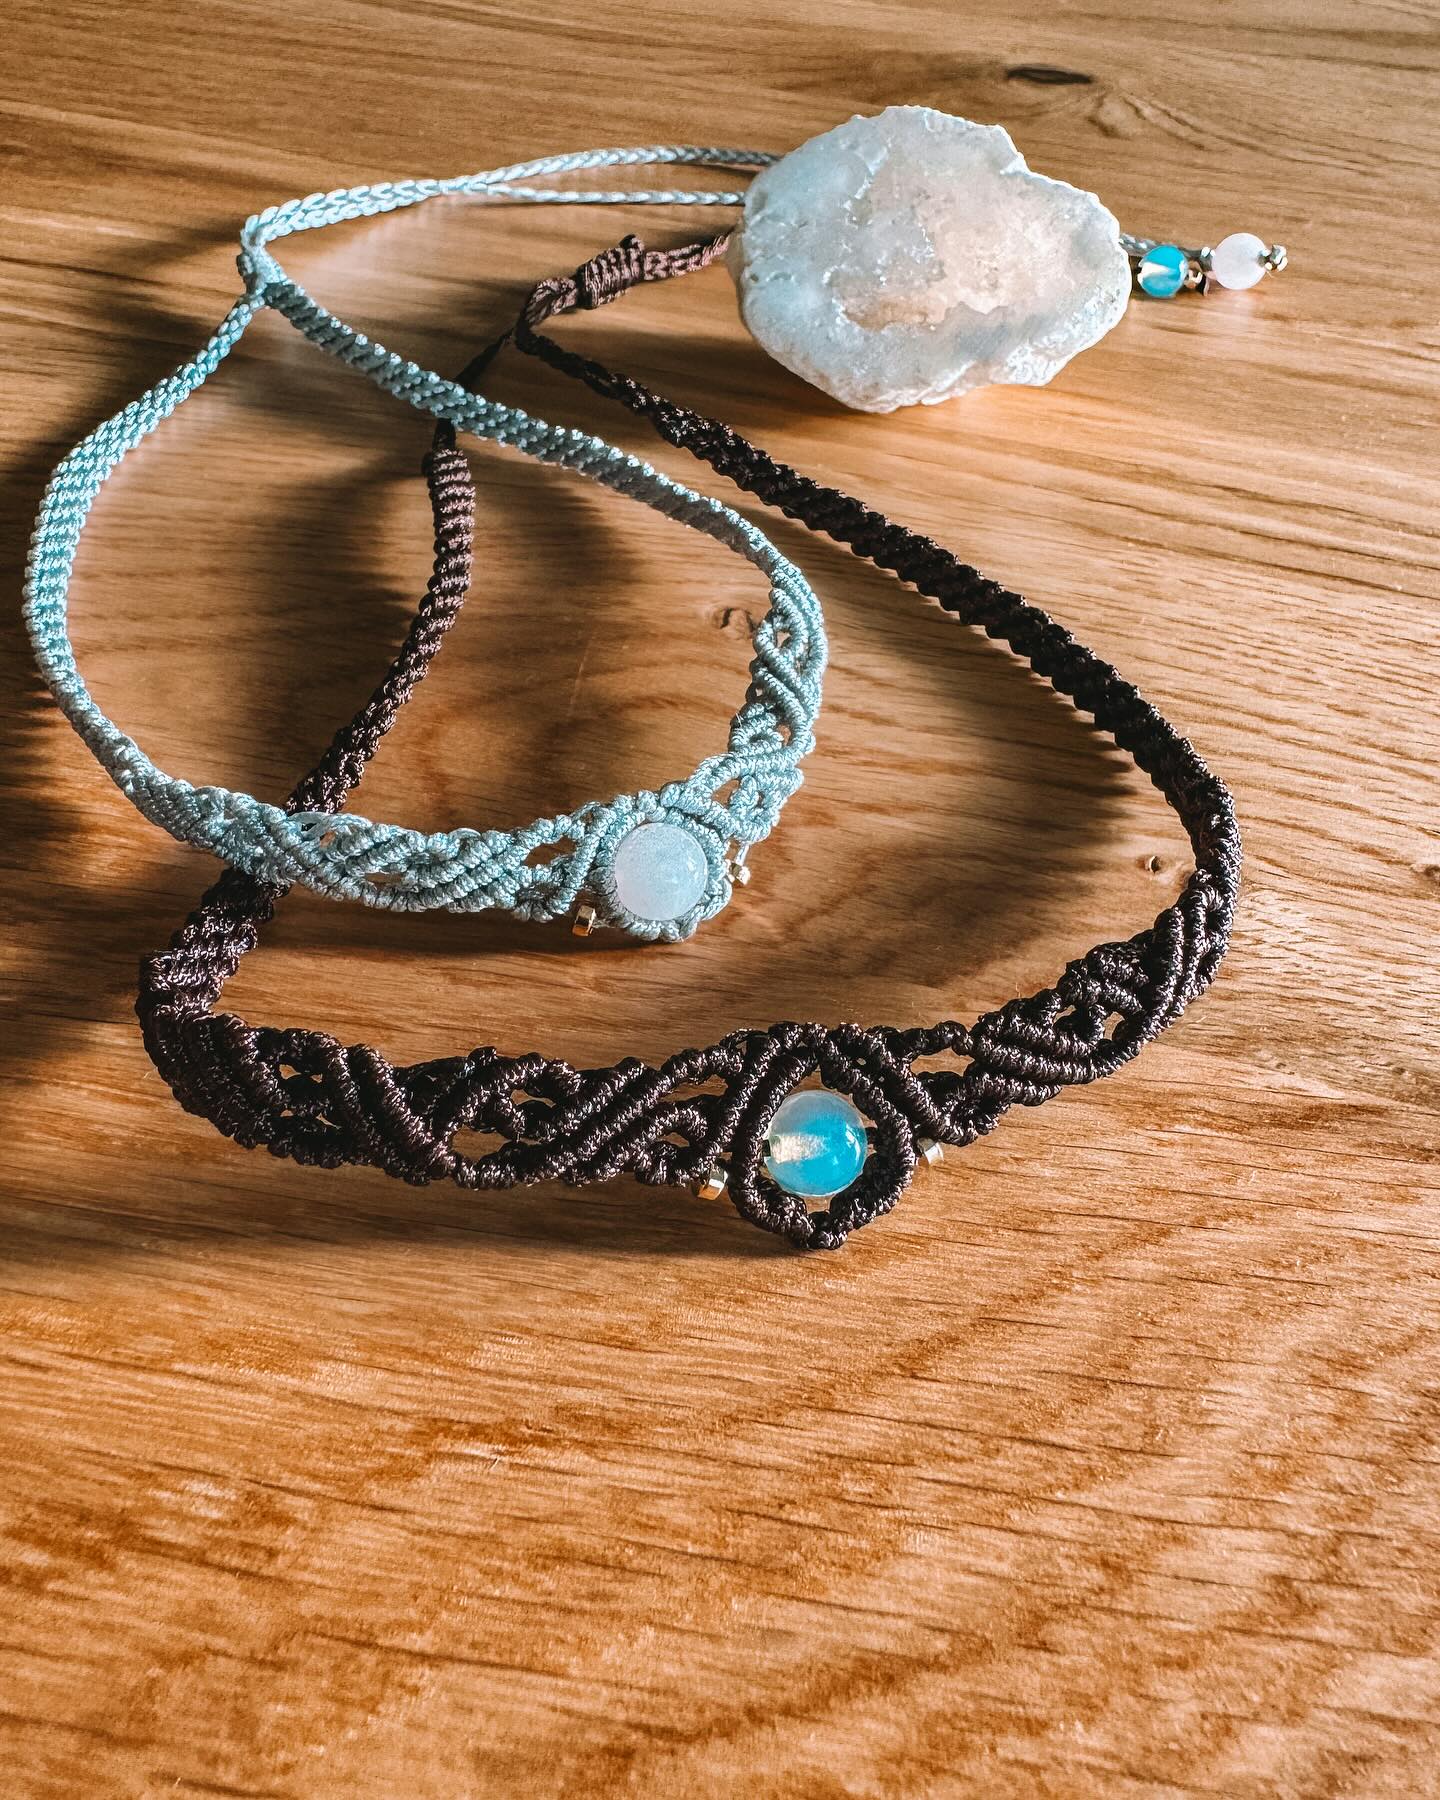 Macrame necklace with Opalite.